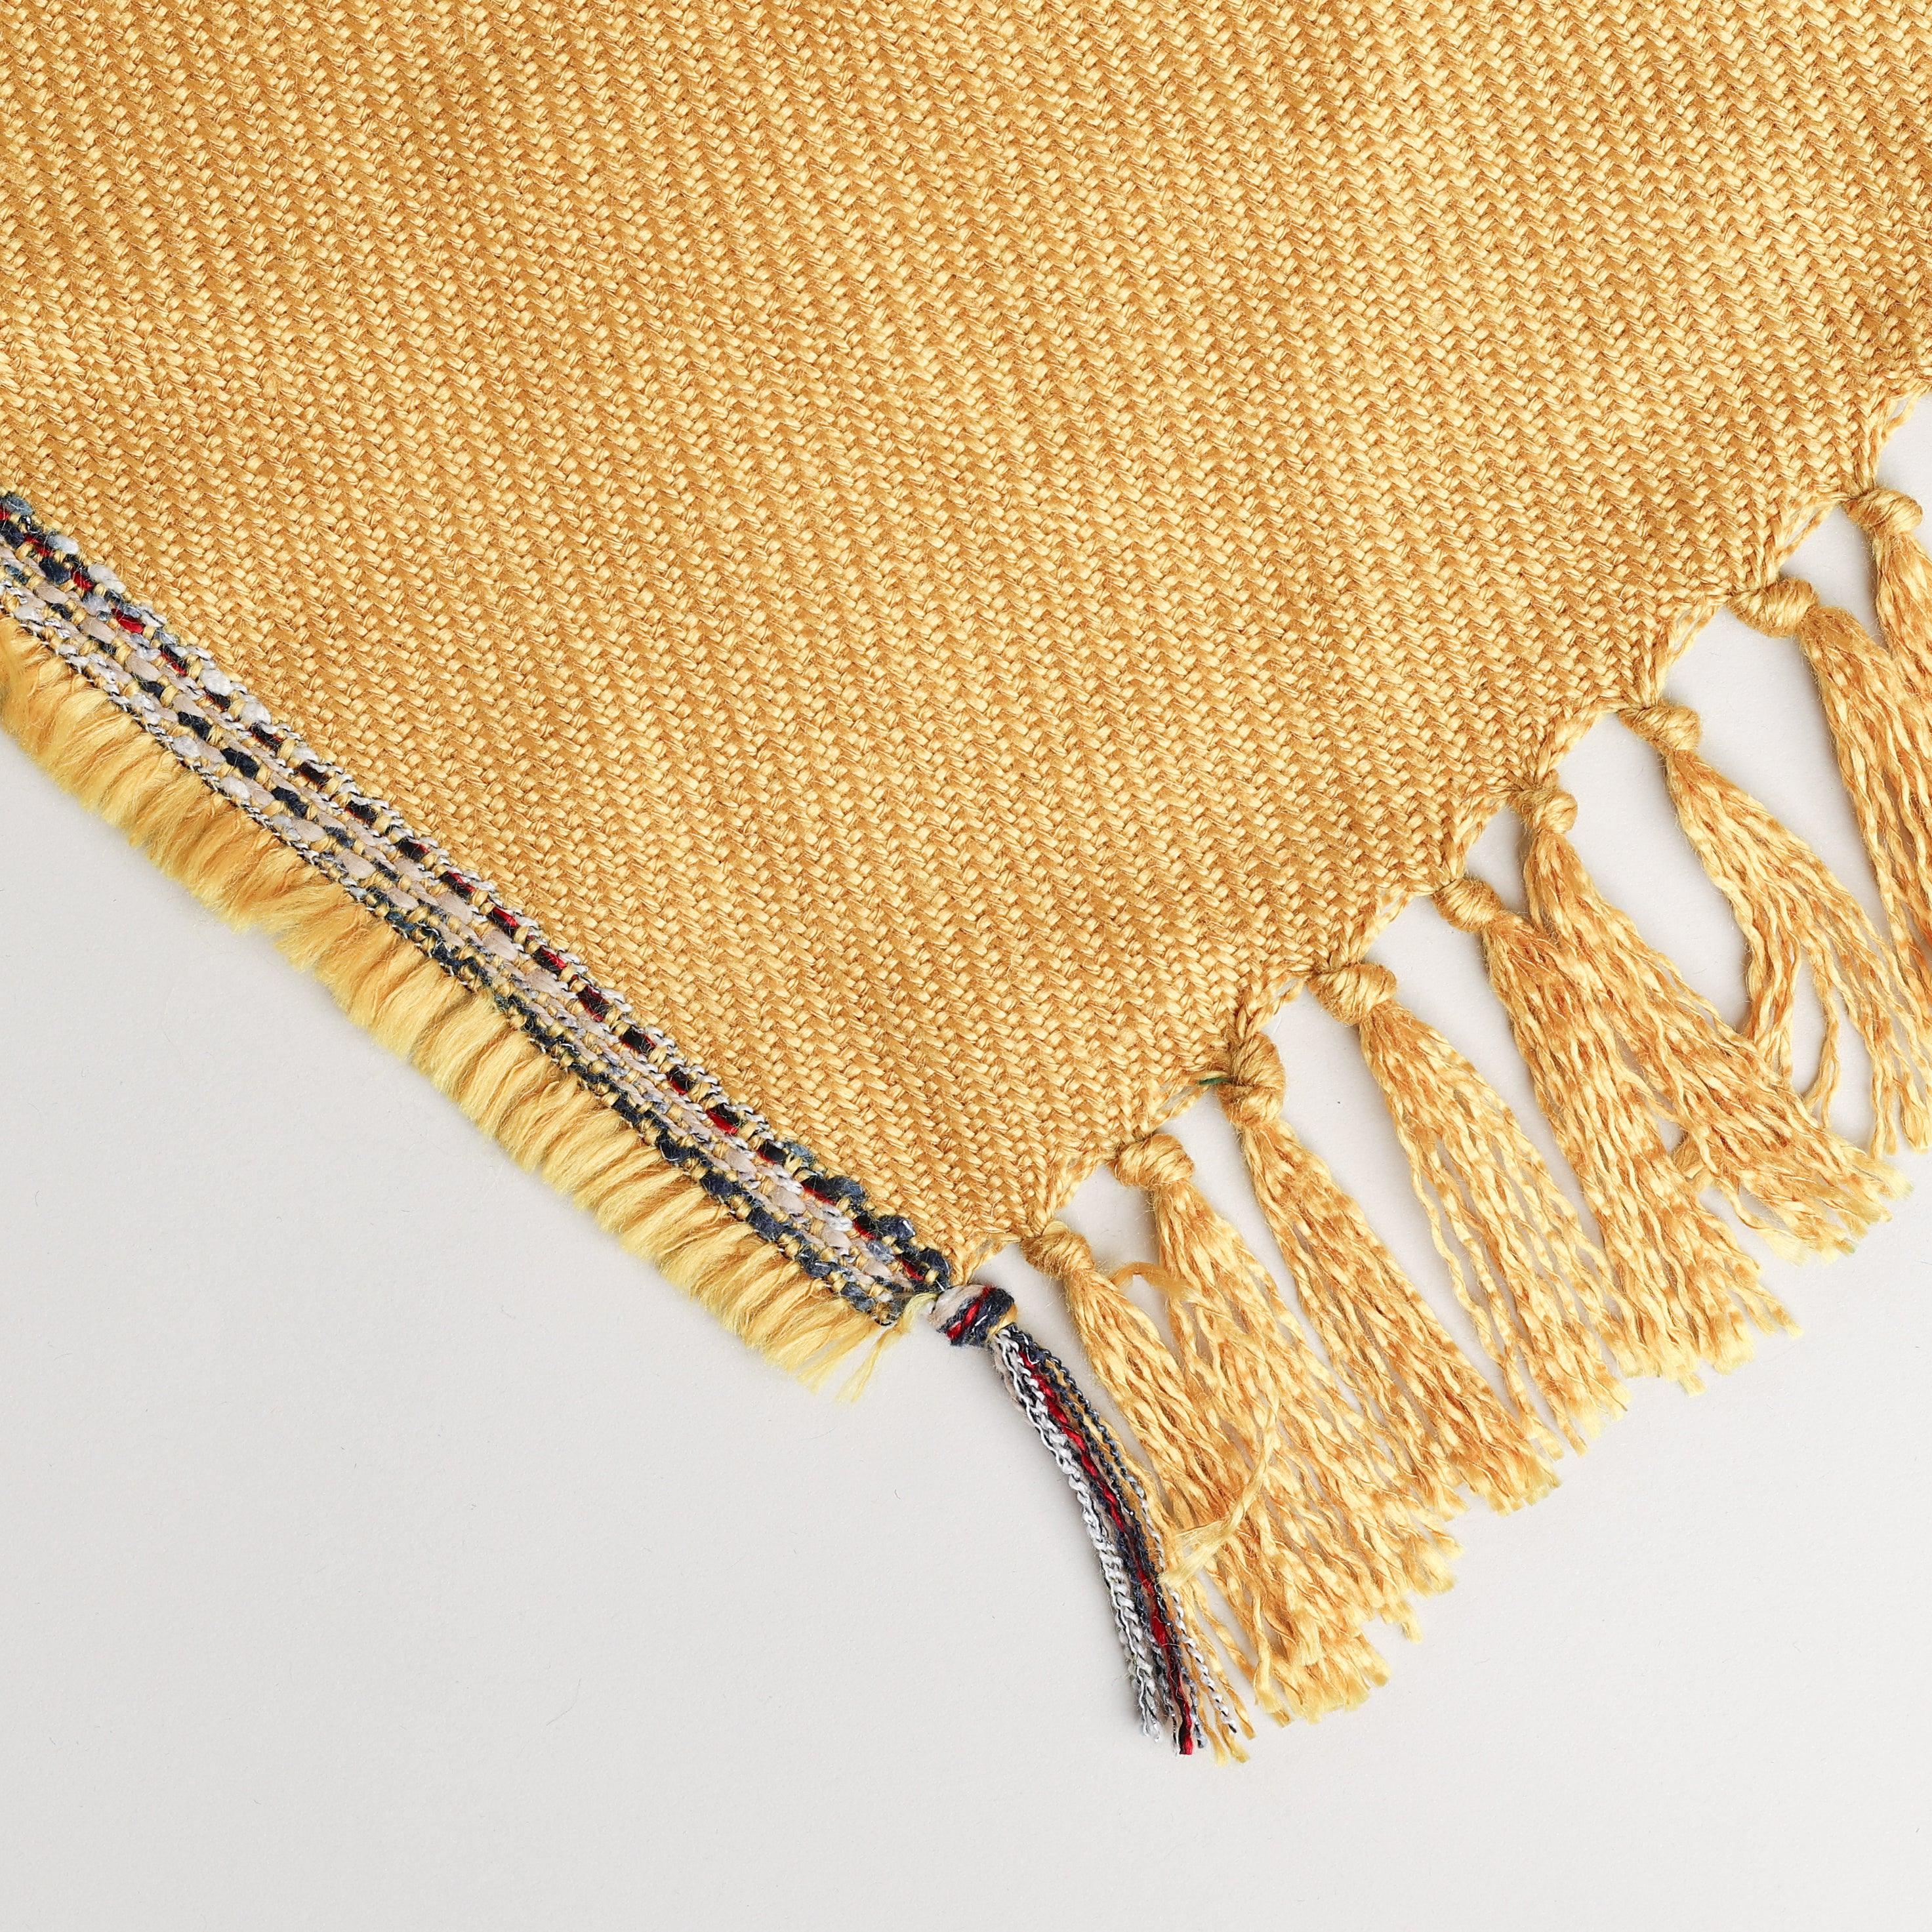 SOFT YELLOW THROW BLANKET - Boucle Home